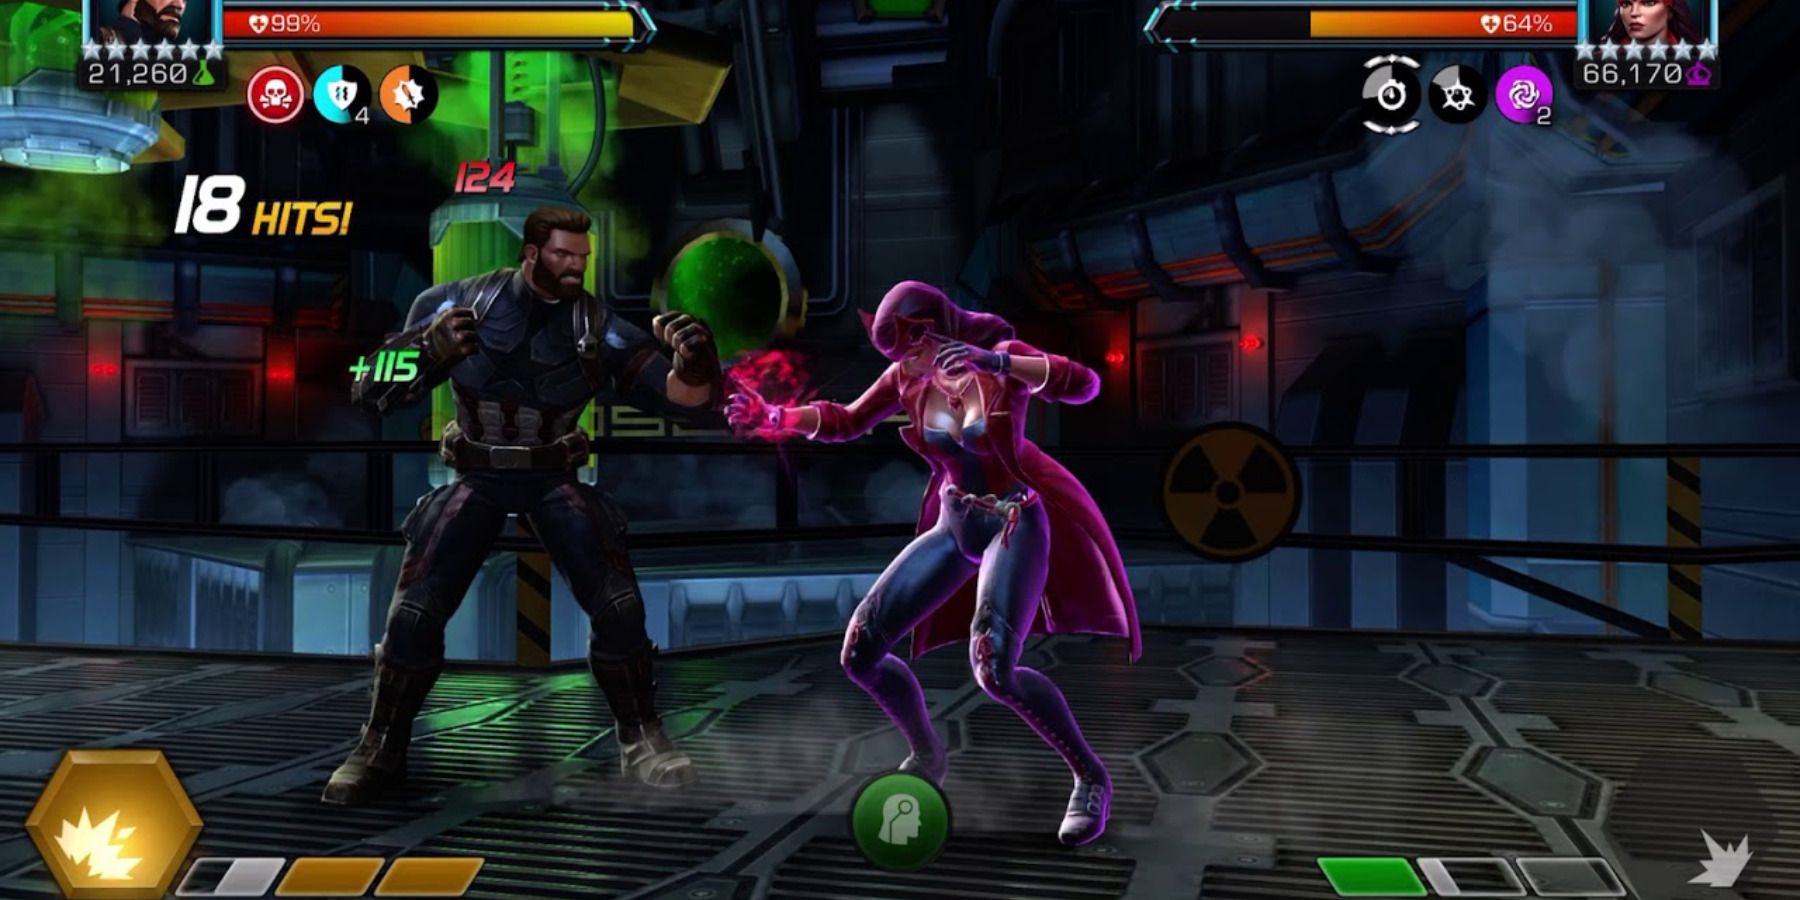 Scarlet Witch fighting Captain America in Marvel Contest of Champions.